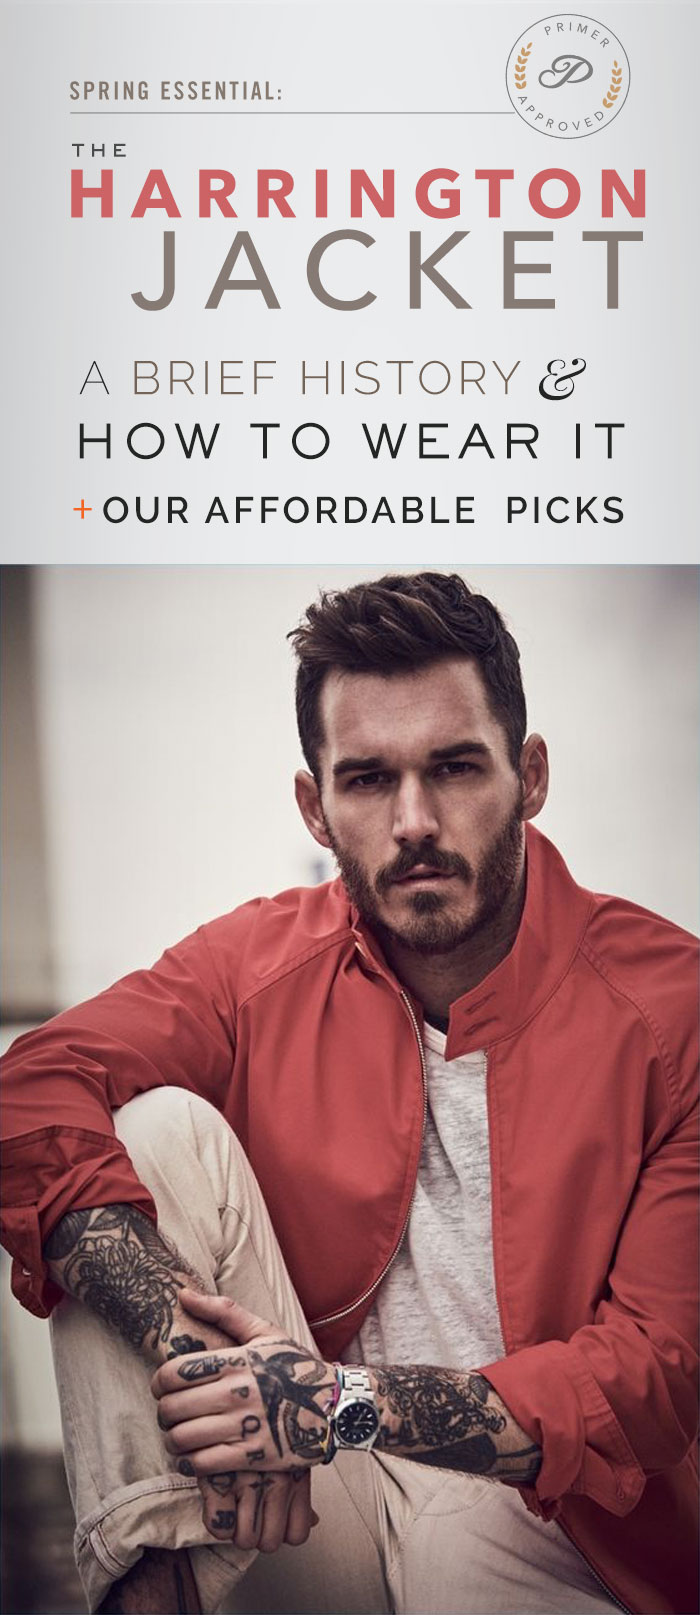 The Harrington Jacket   How to Wear It, History, & Affordable Picks